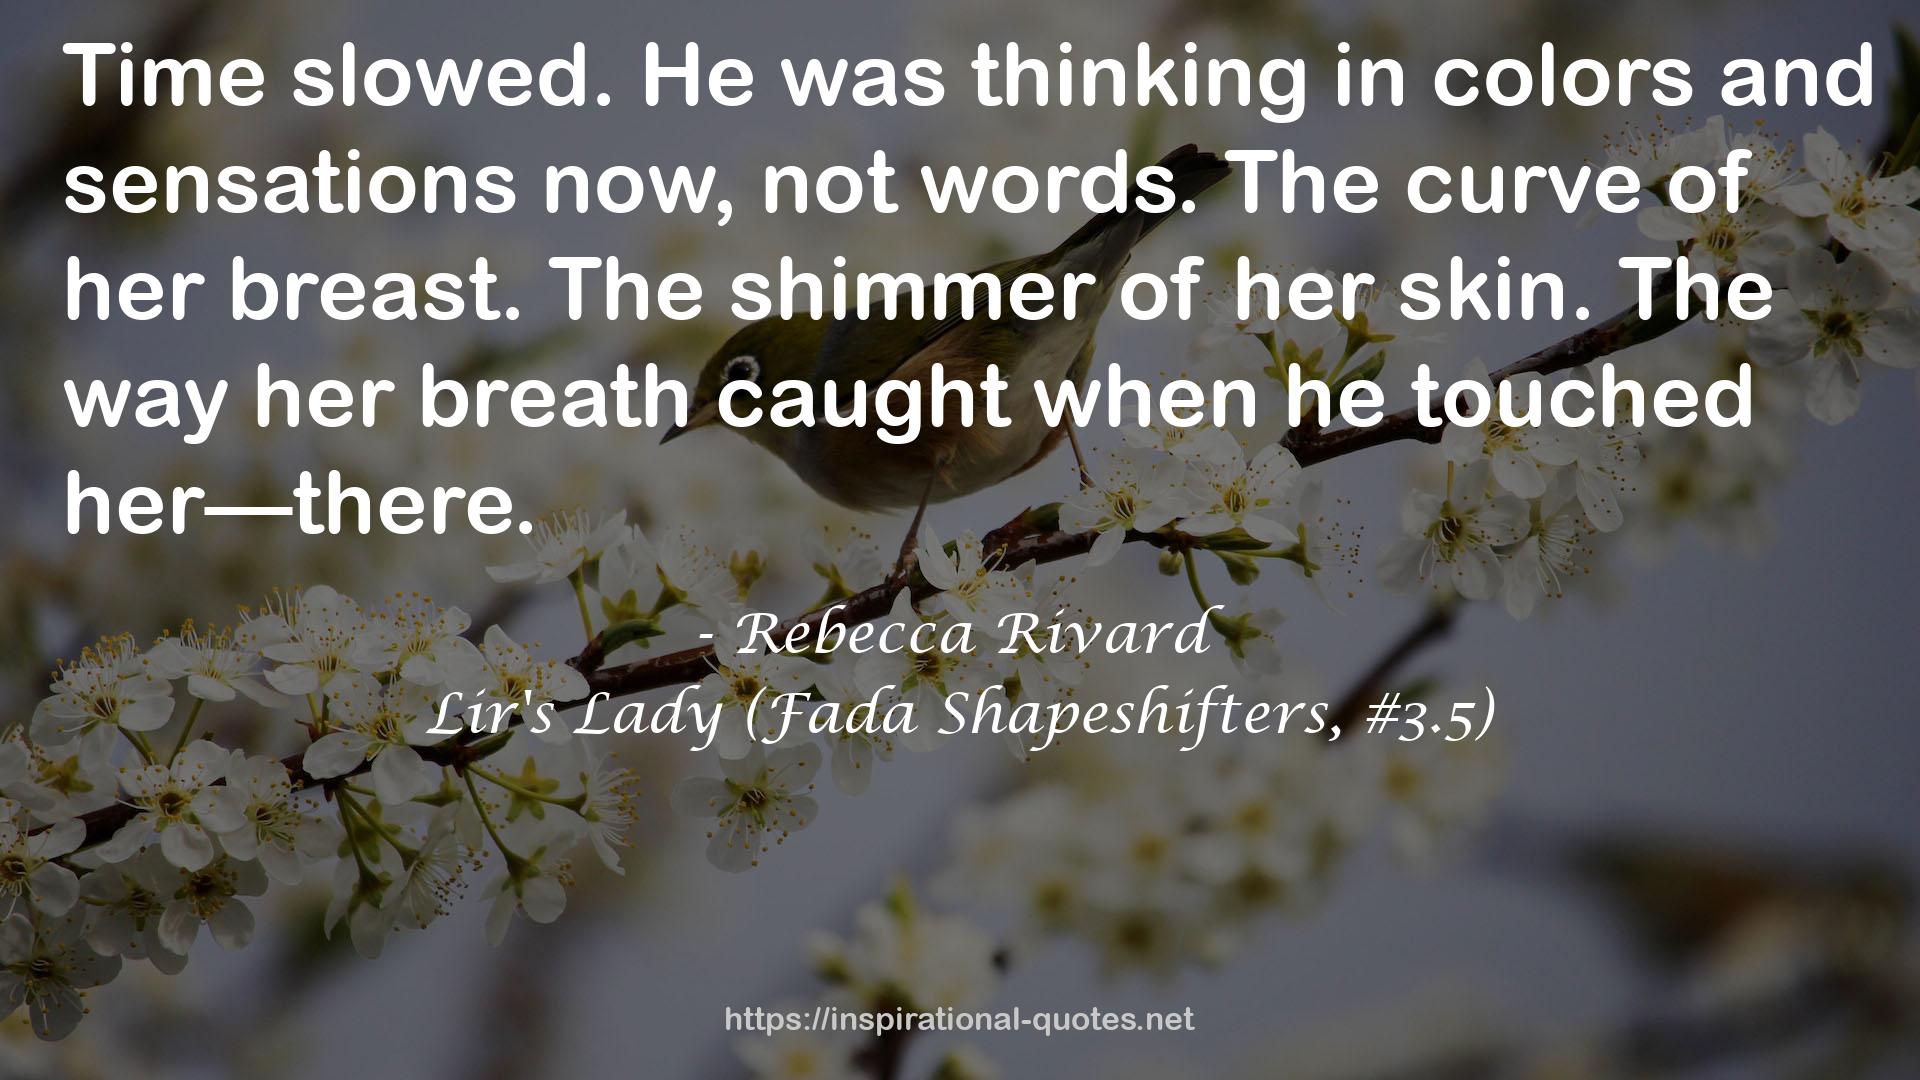 Lir's Lady (Fada Shapeshifters, #3.5) QUOTES